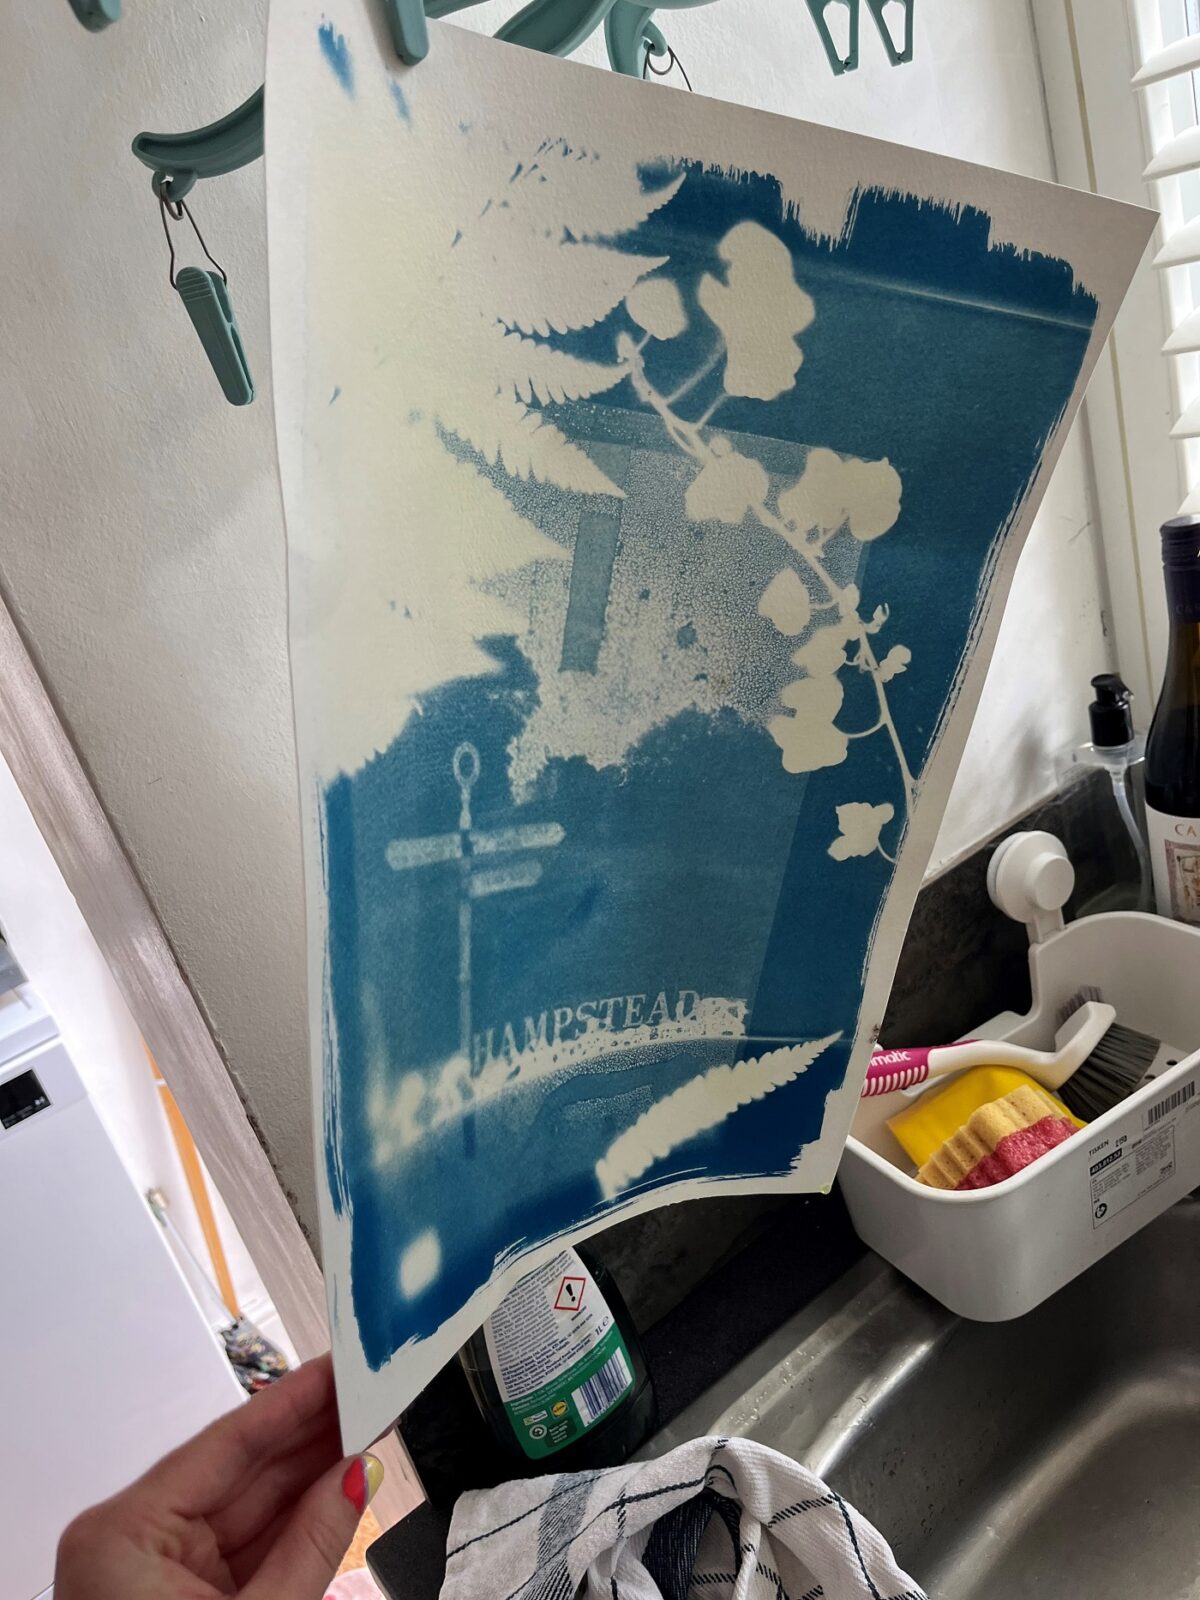 A cyanotype print showing leaves and a signpost. Image ©Rose Wilkinson